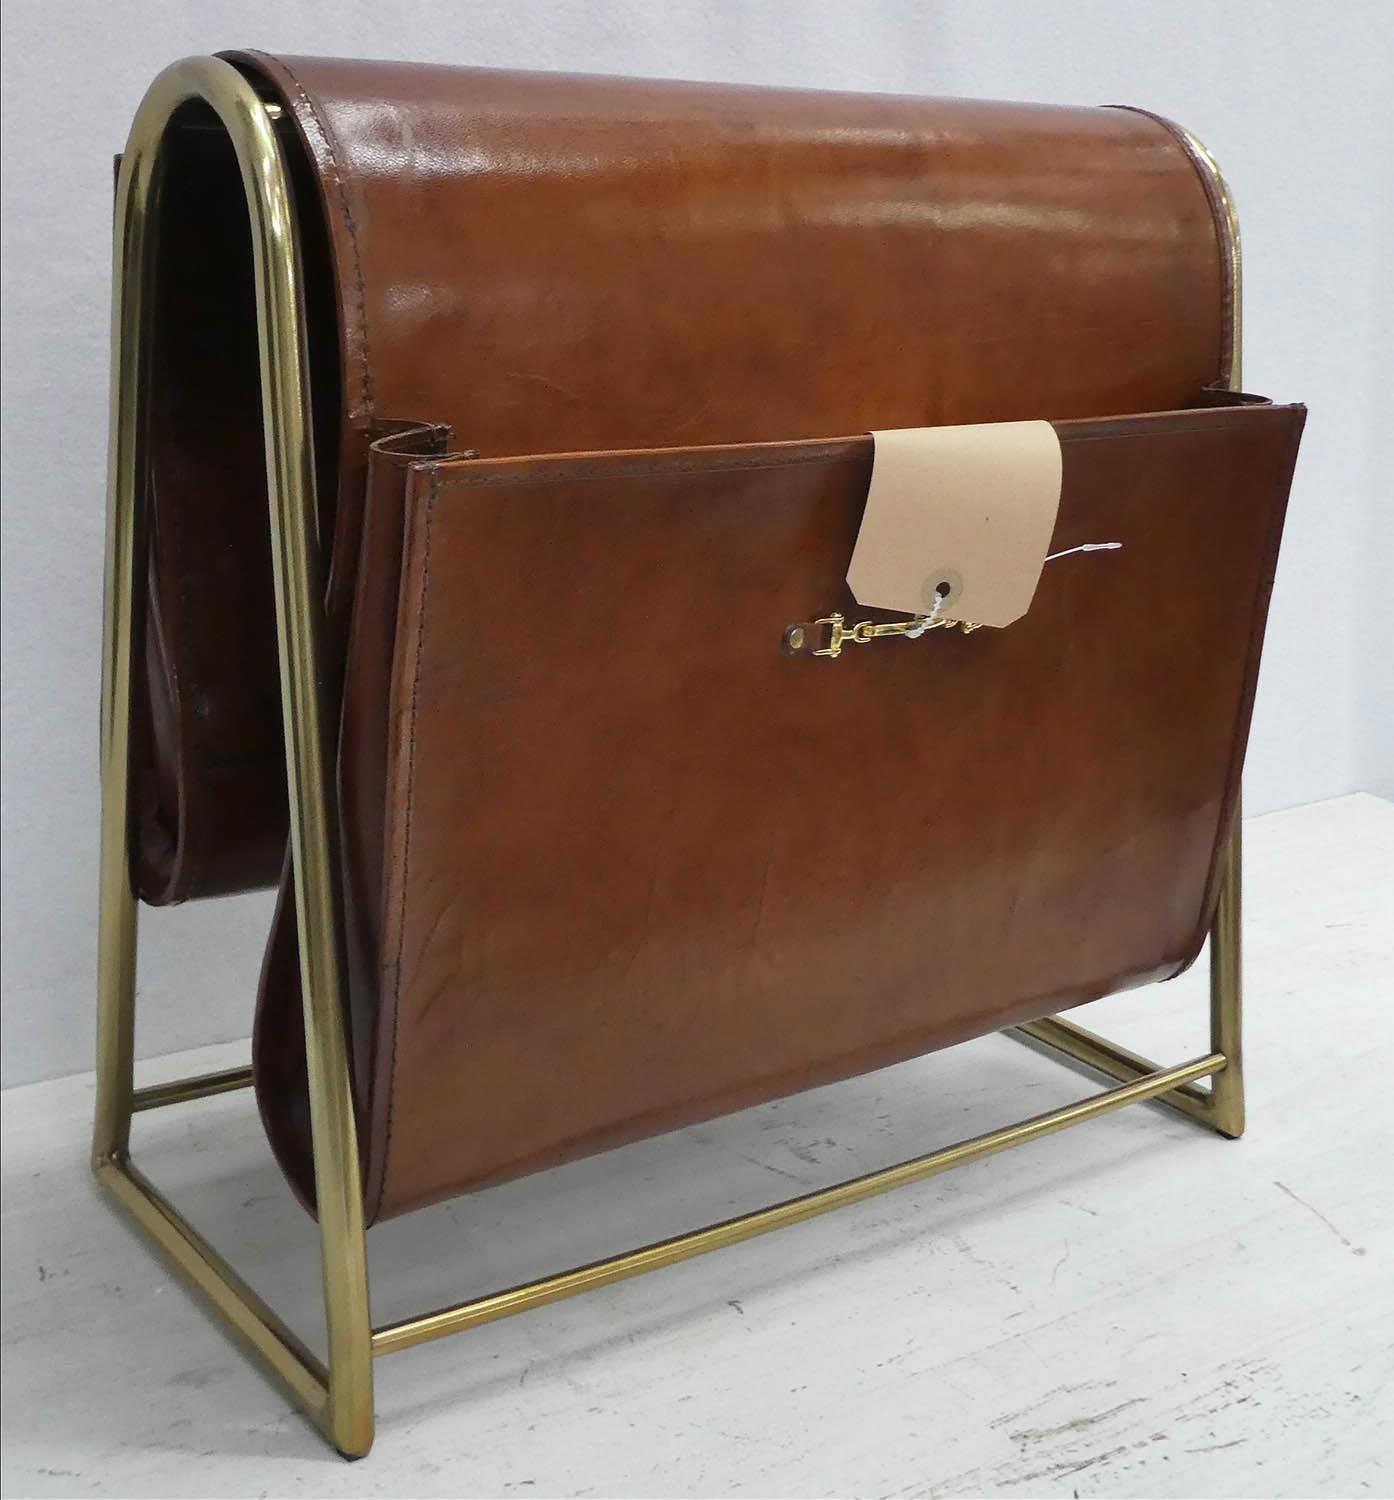 MAGAZINE RACK, 1950's French style, gilt metal and leather, 20cm x 38cm x 38cm. - Image 2 of 3